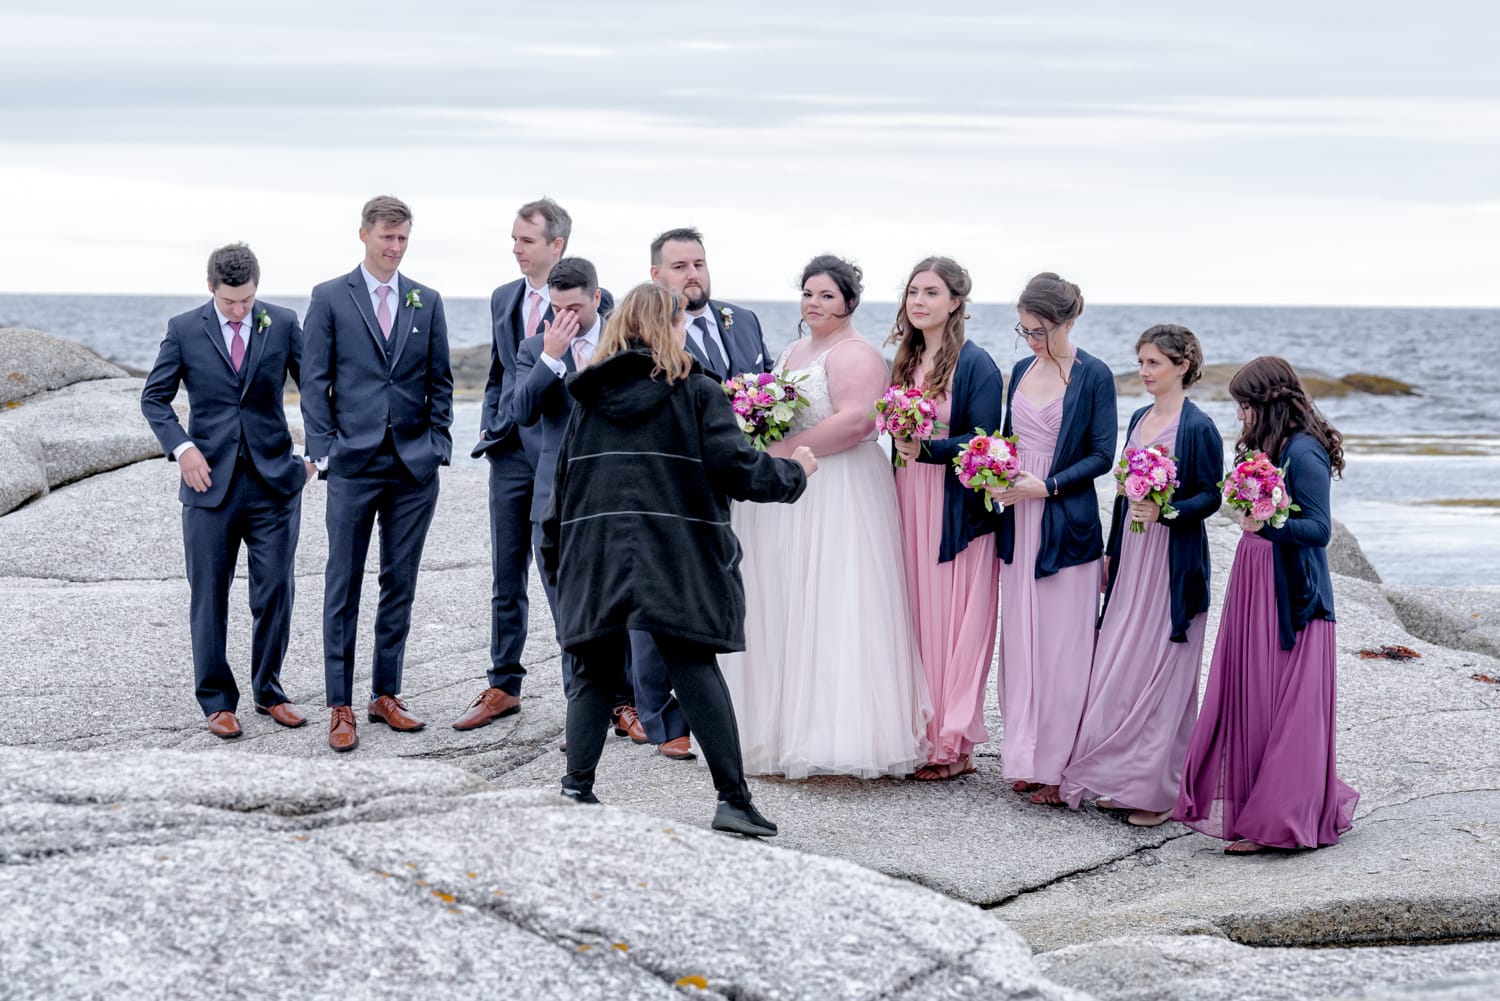 Sandra Adamson at work photographing the wedding party at Peggy's Cove in NS.